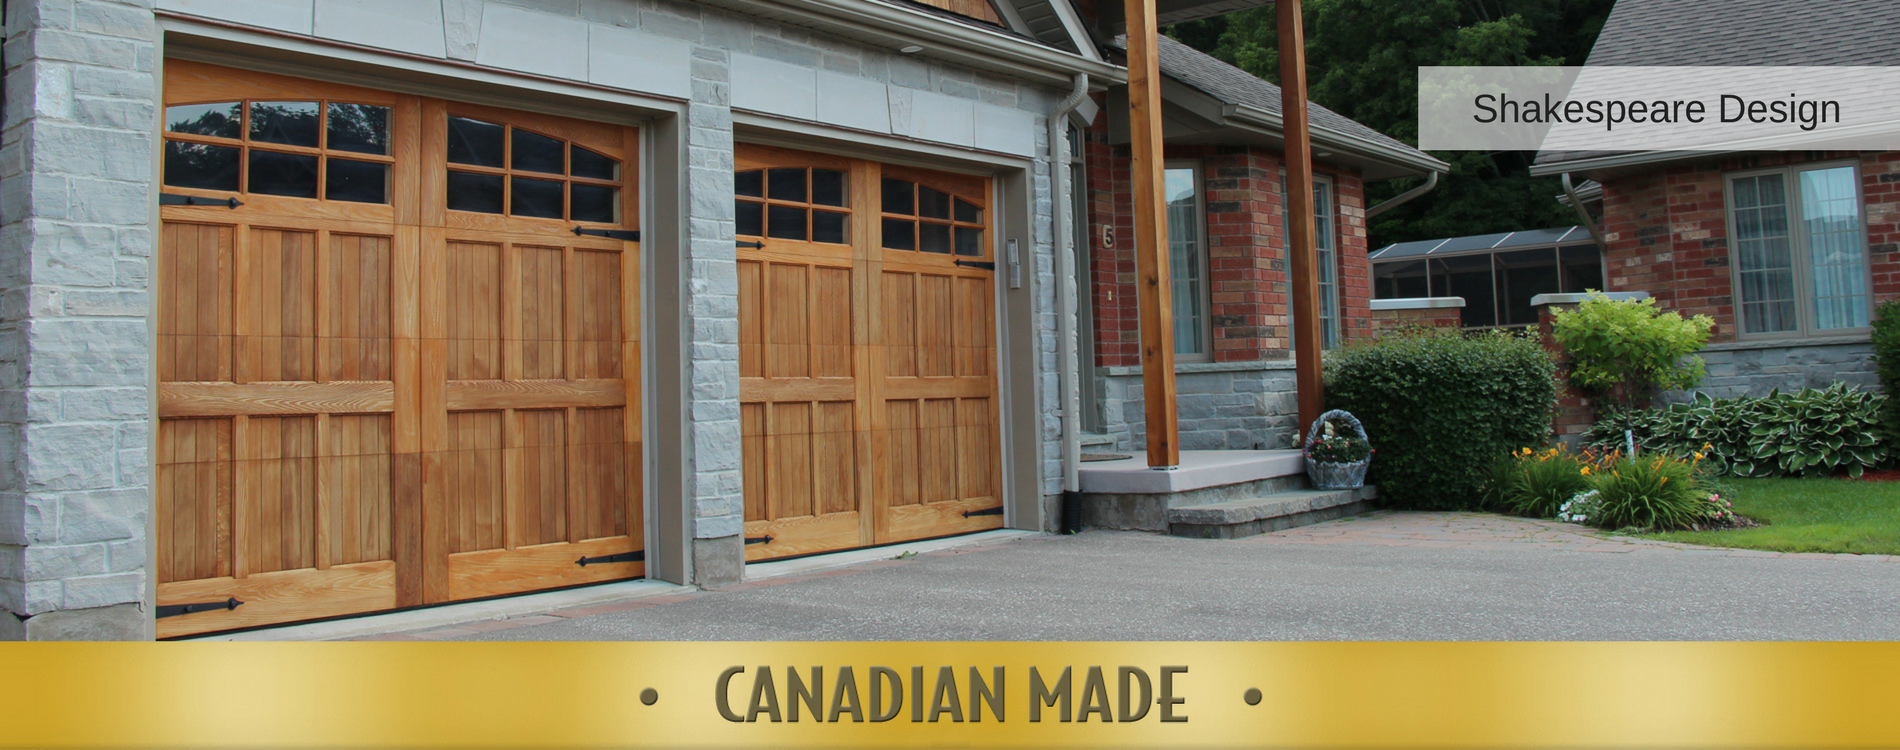 Shakespeare Design by Oxford Carriage Door Ltd. located in Stratford, Ontario, Canada